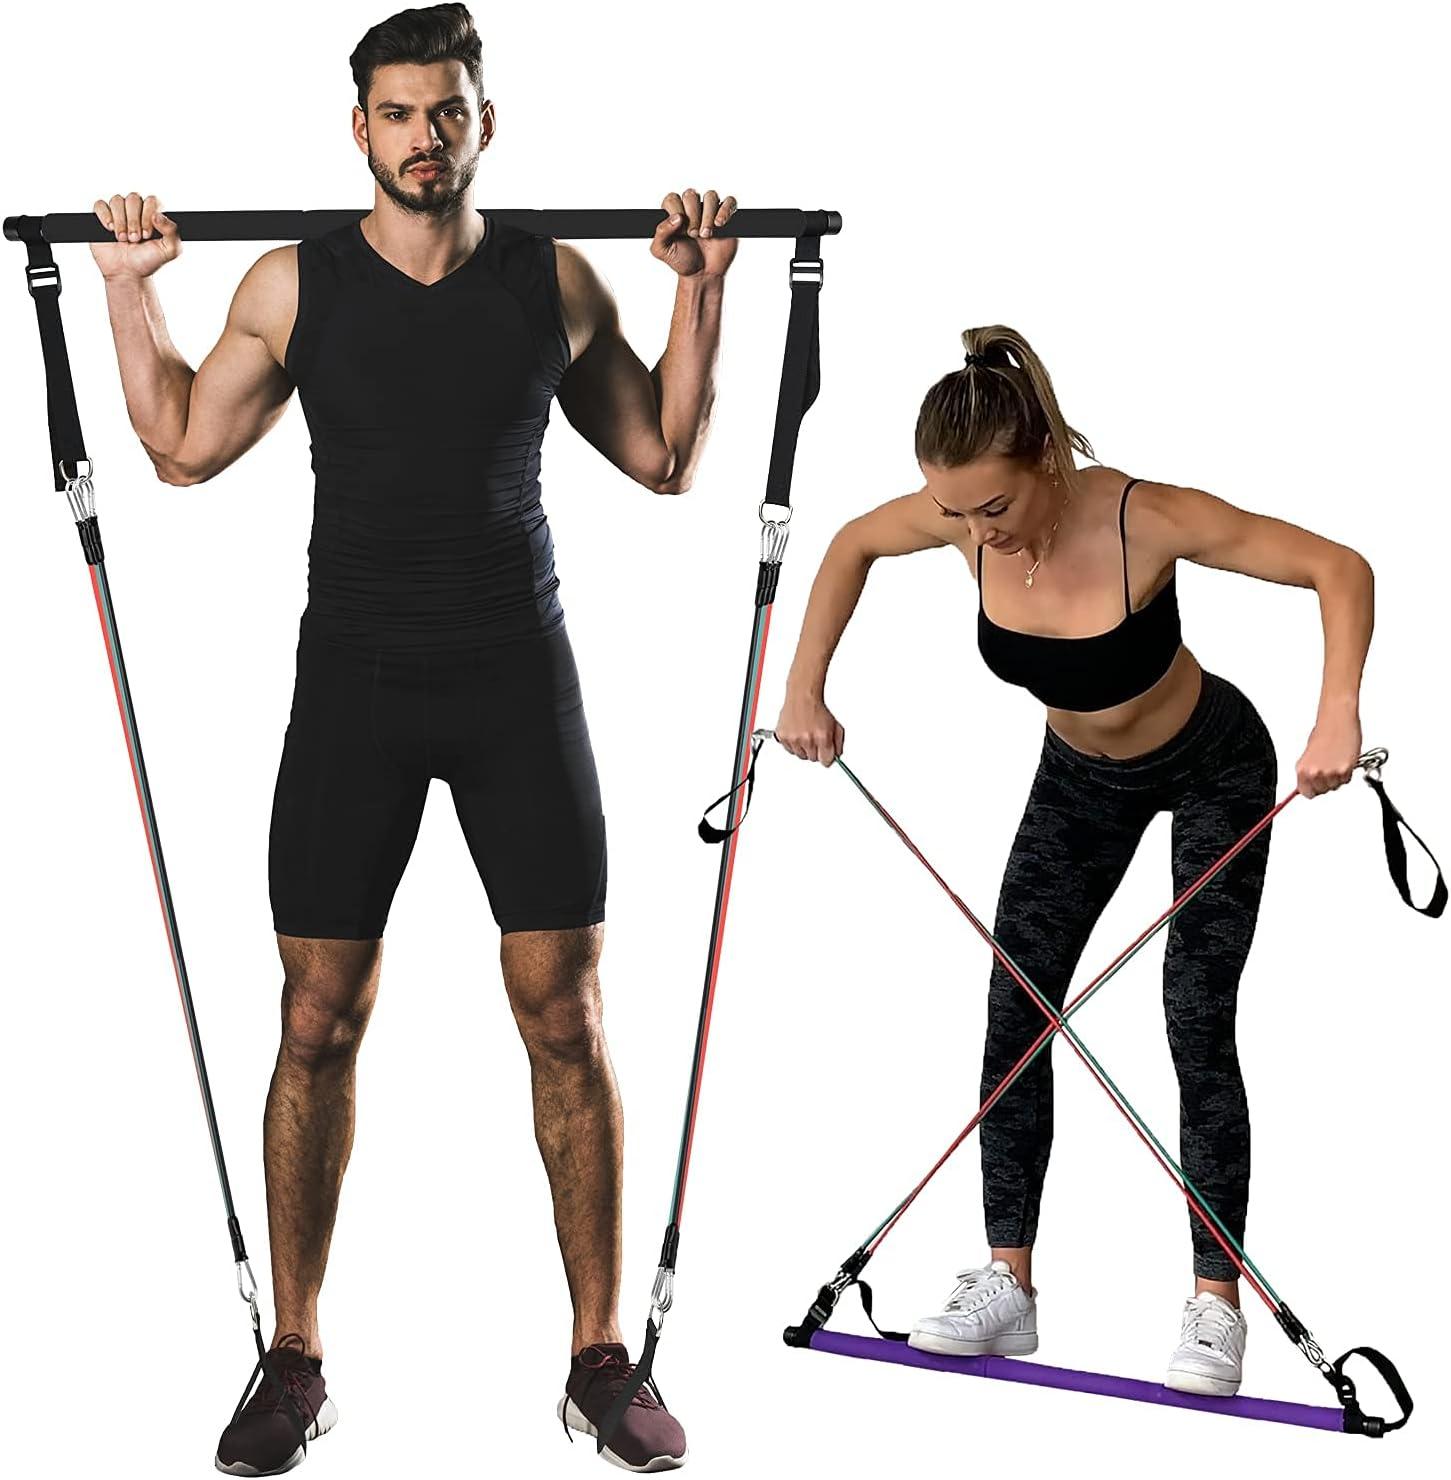 Goocrun Portable Pilates Bar Kit with Resistance Bands for Men and Women -  6 Exercise Resistance Bands (15, 20, 30 LB) - Home Gym Equipment - Supports  Full-Body Workouts with Video Purple